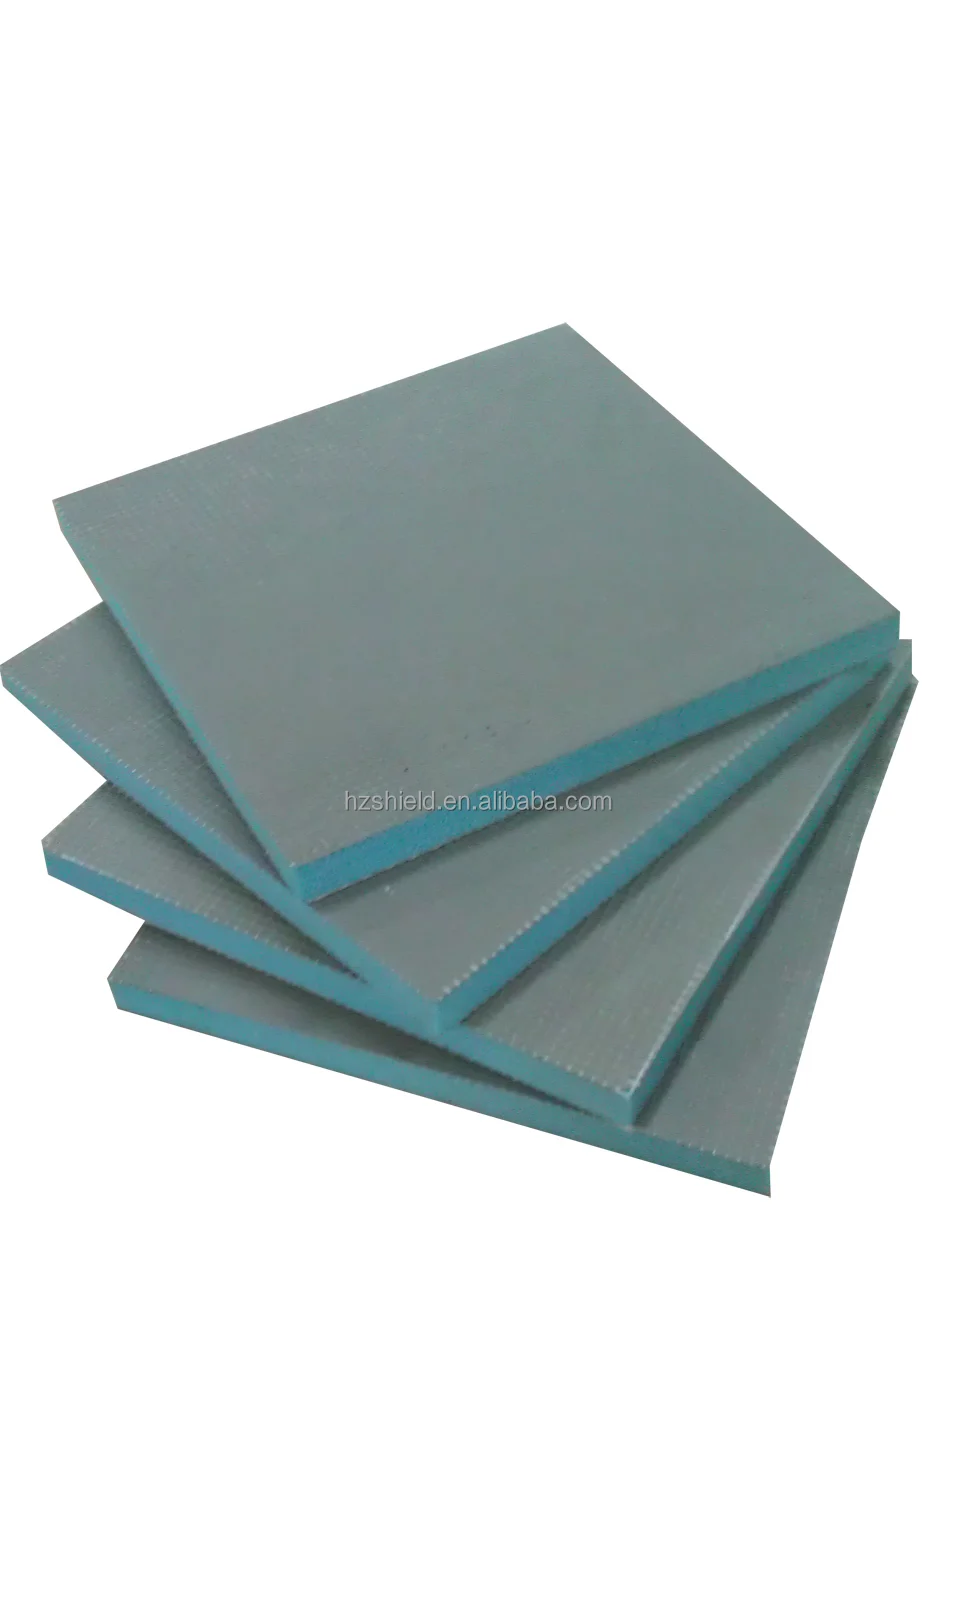 Thickness Bathroom Floor Xps Insulation And Wall Waterproof Tile